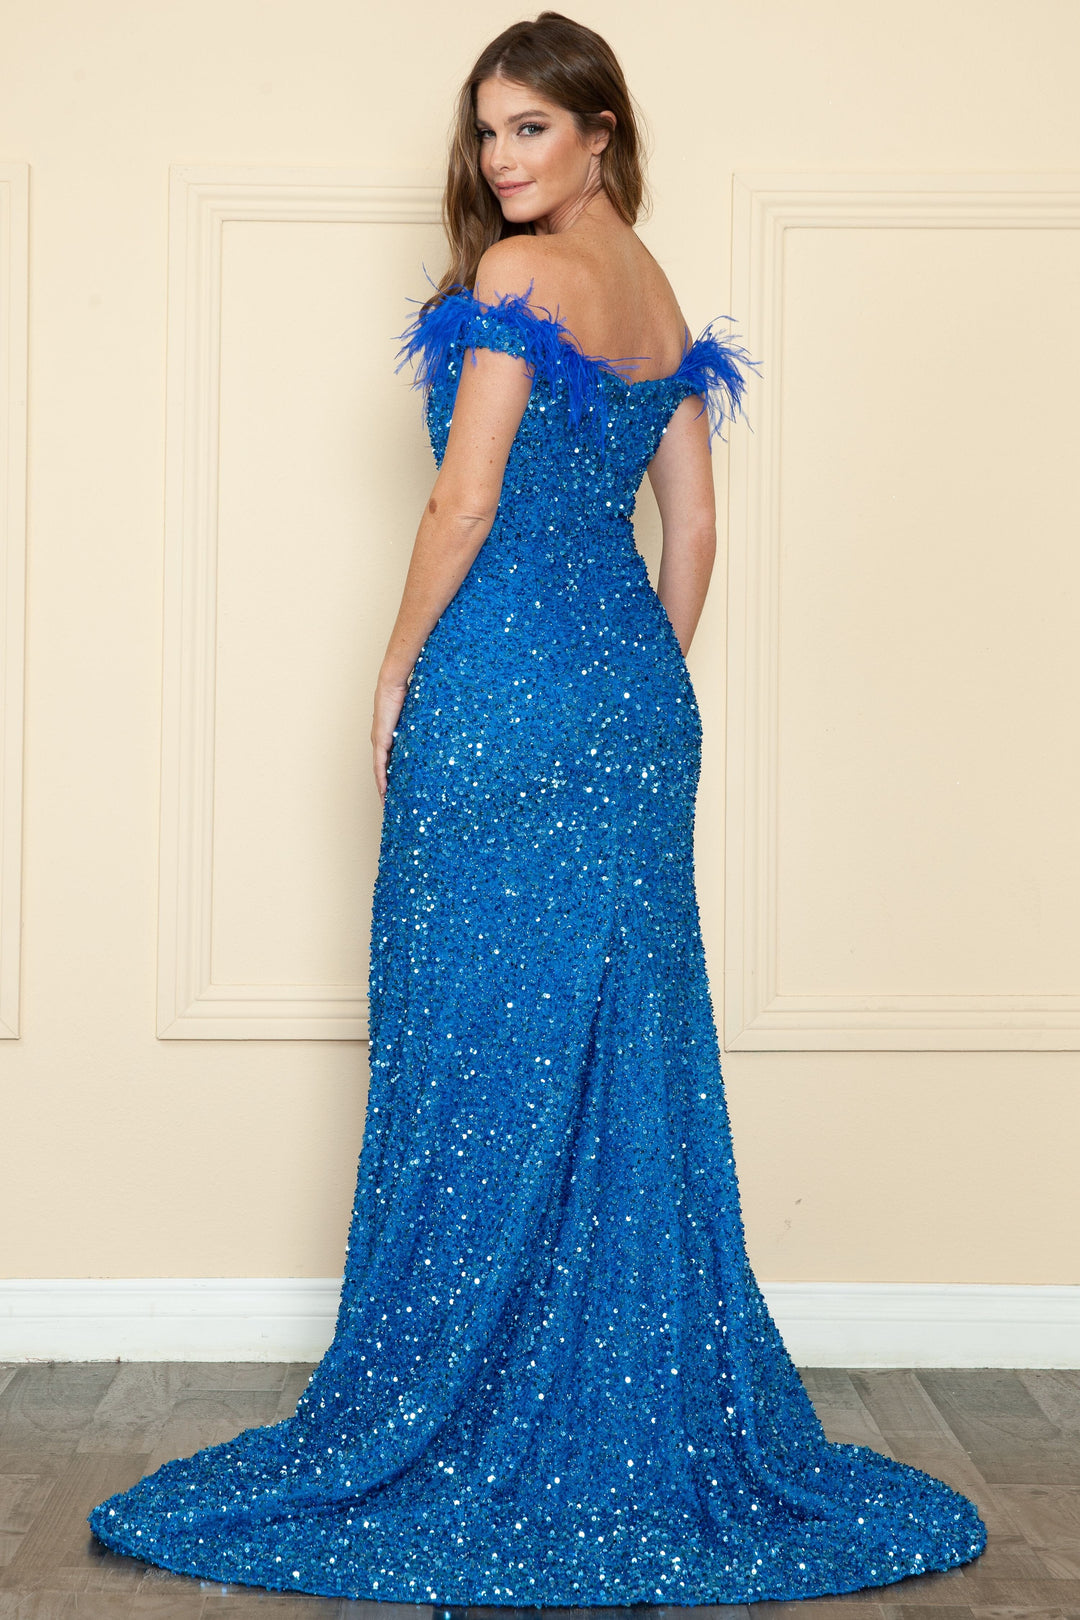 Fitted Off Shoulder Sequin Feather Gown by Poly USA 8980